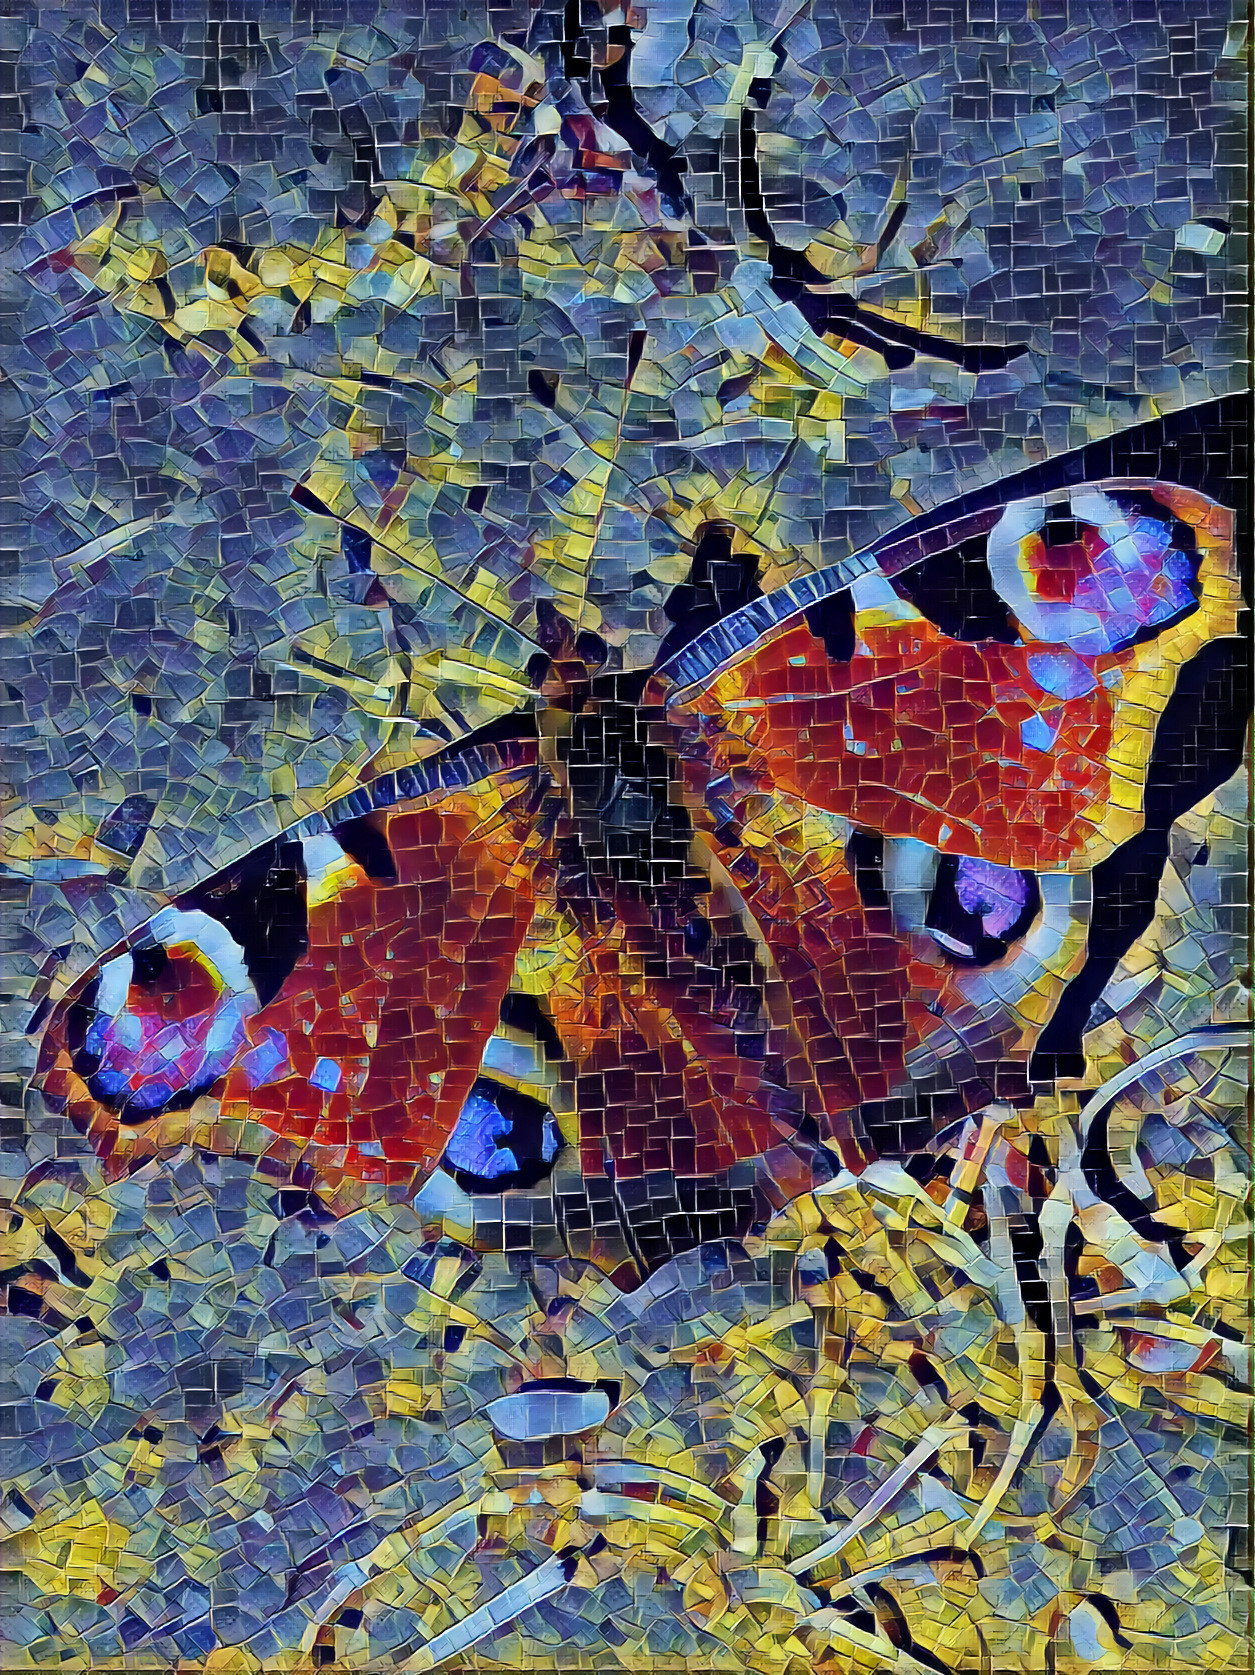 Peacock butterfly (19 April 2020)